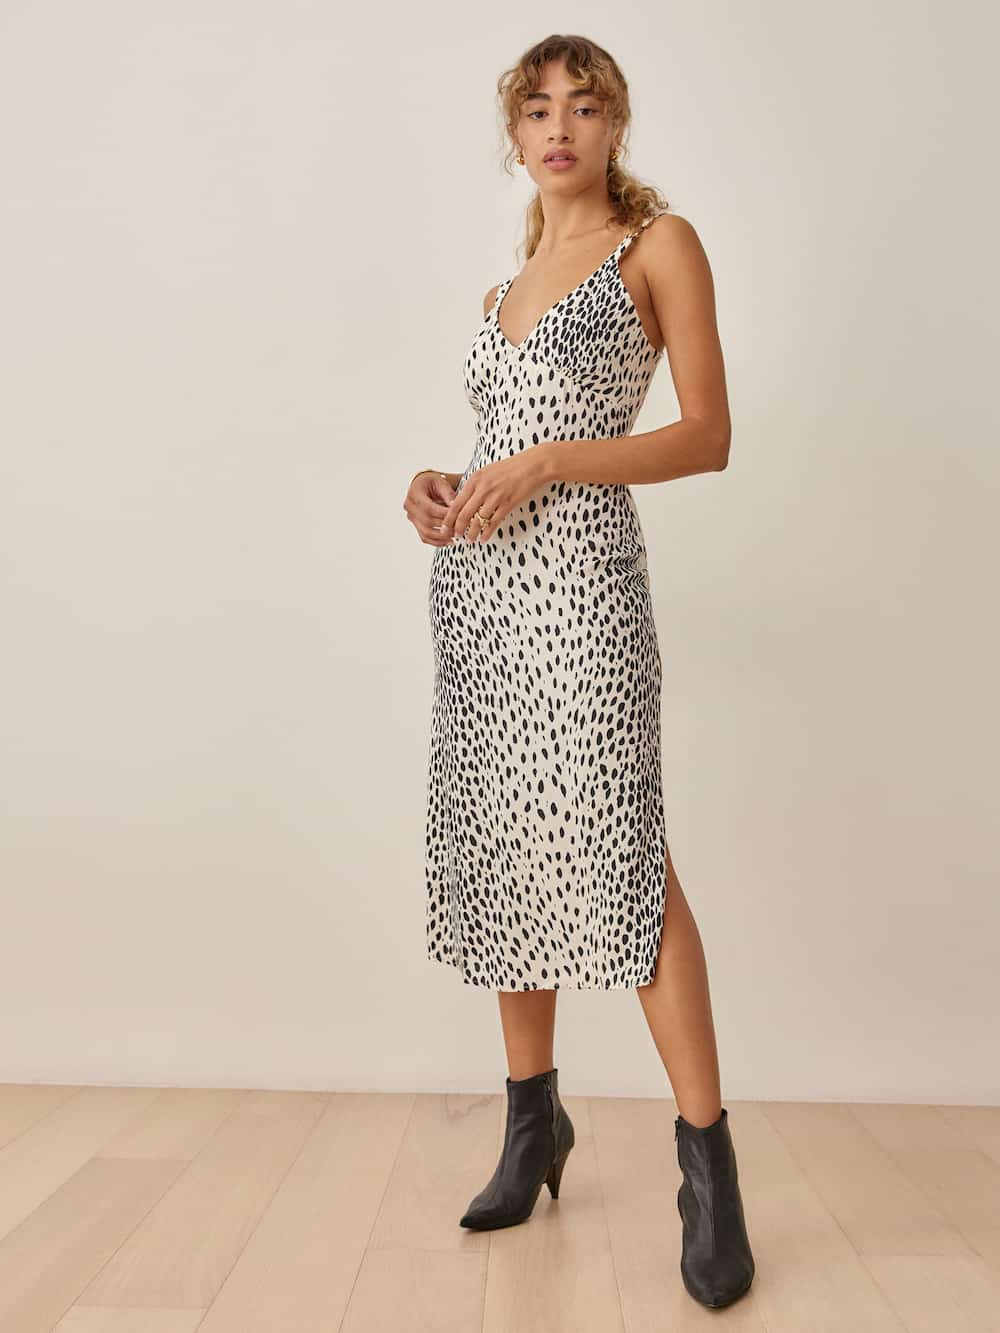 image of a woman in a black and white cheetah animal print slip dress and black booties